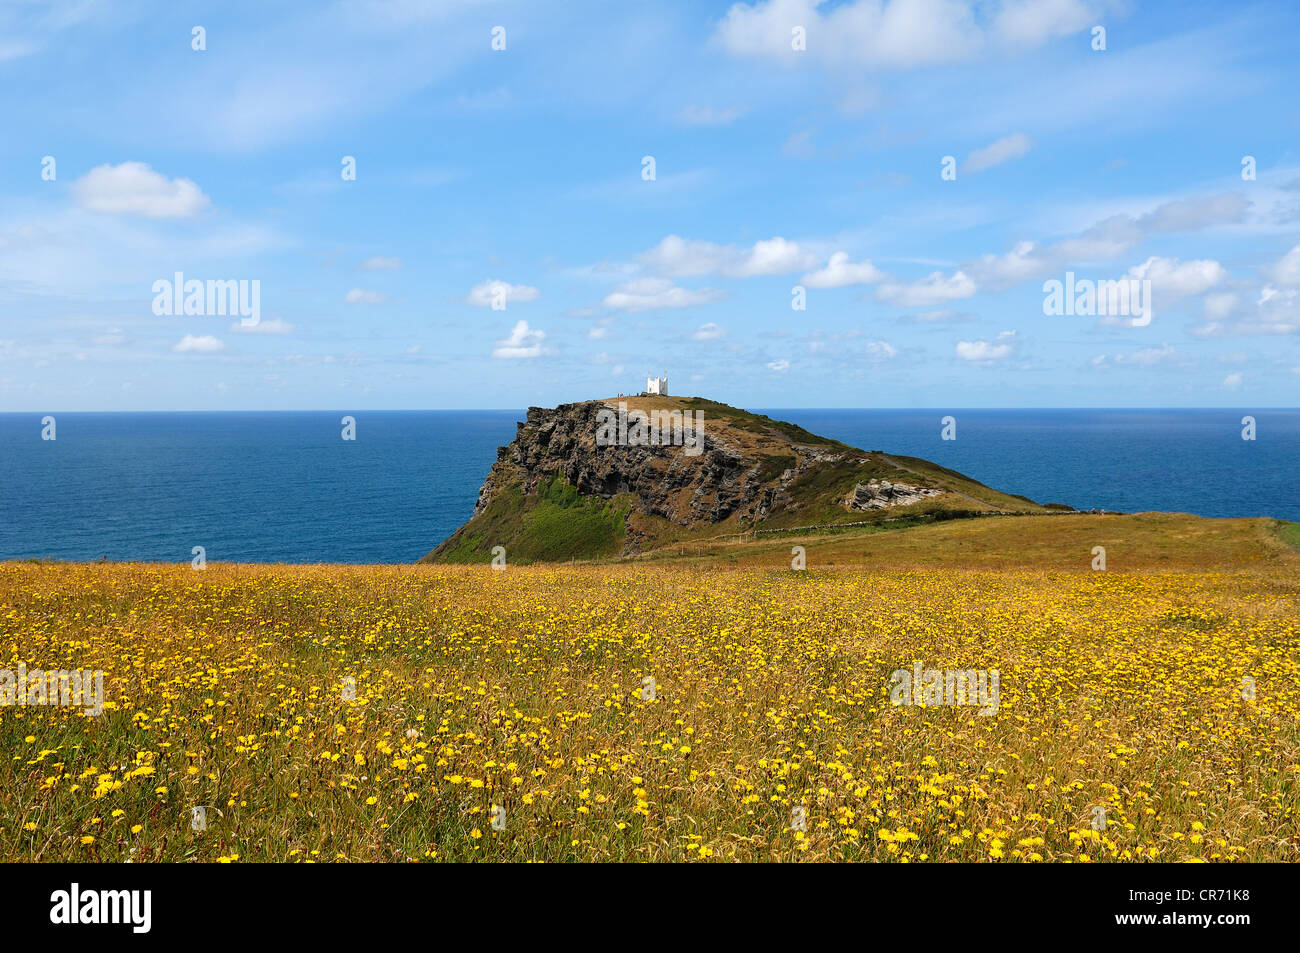 Rugged cliffs on the coast near Boscastle, National Coastwatch observation tower at the back, flowering meadow at the front Stock Photo